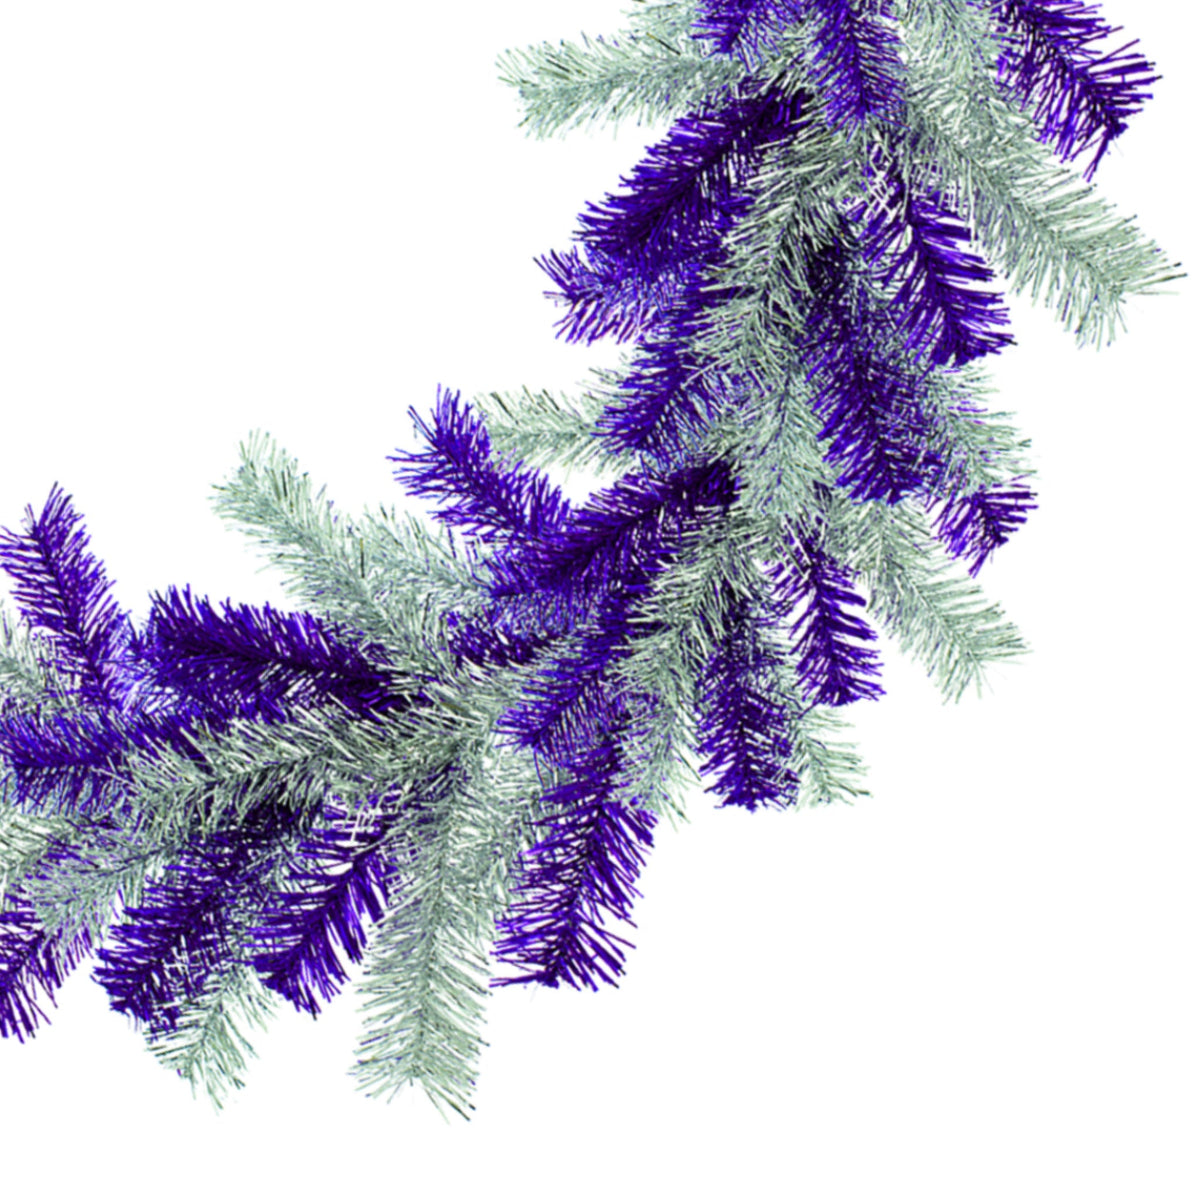 Purple and Silver Tinsel Christmas Wreaths